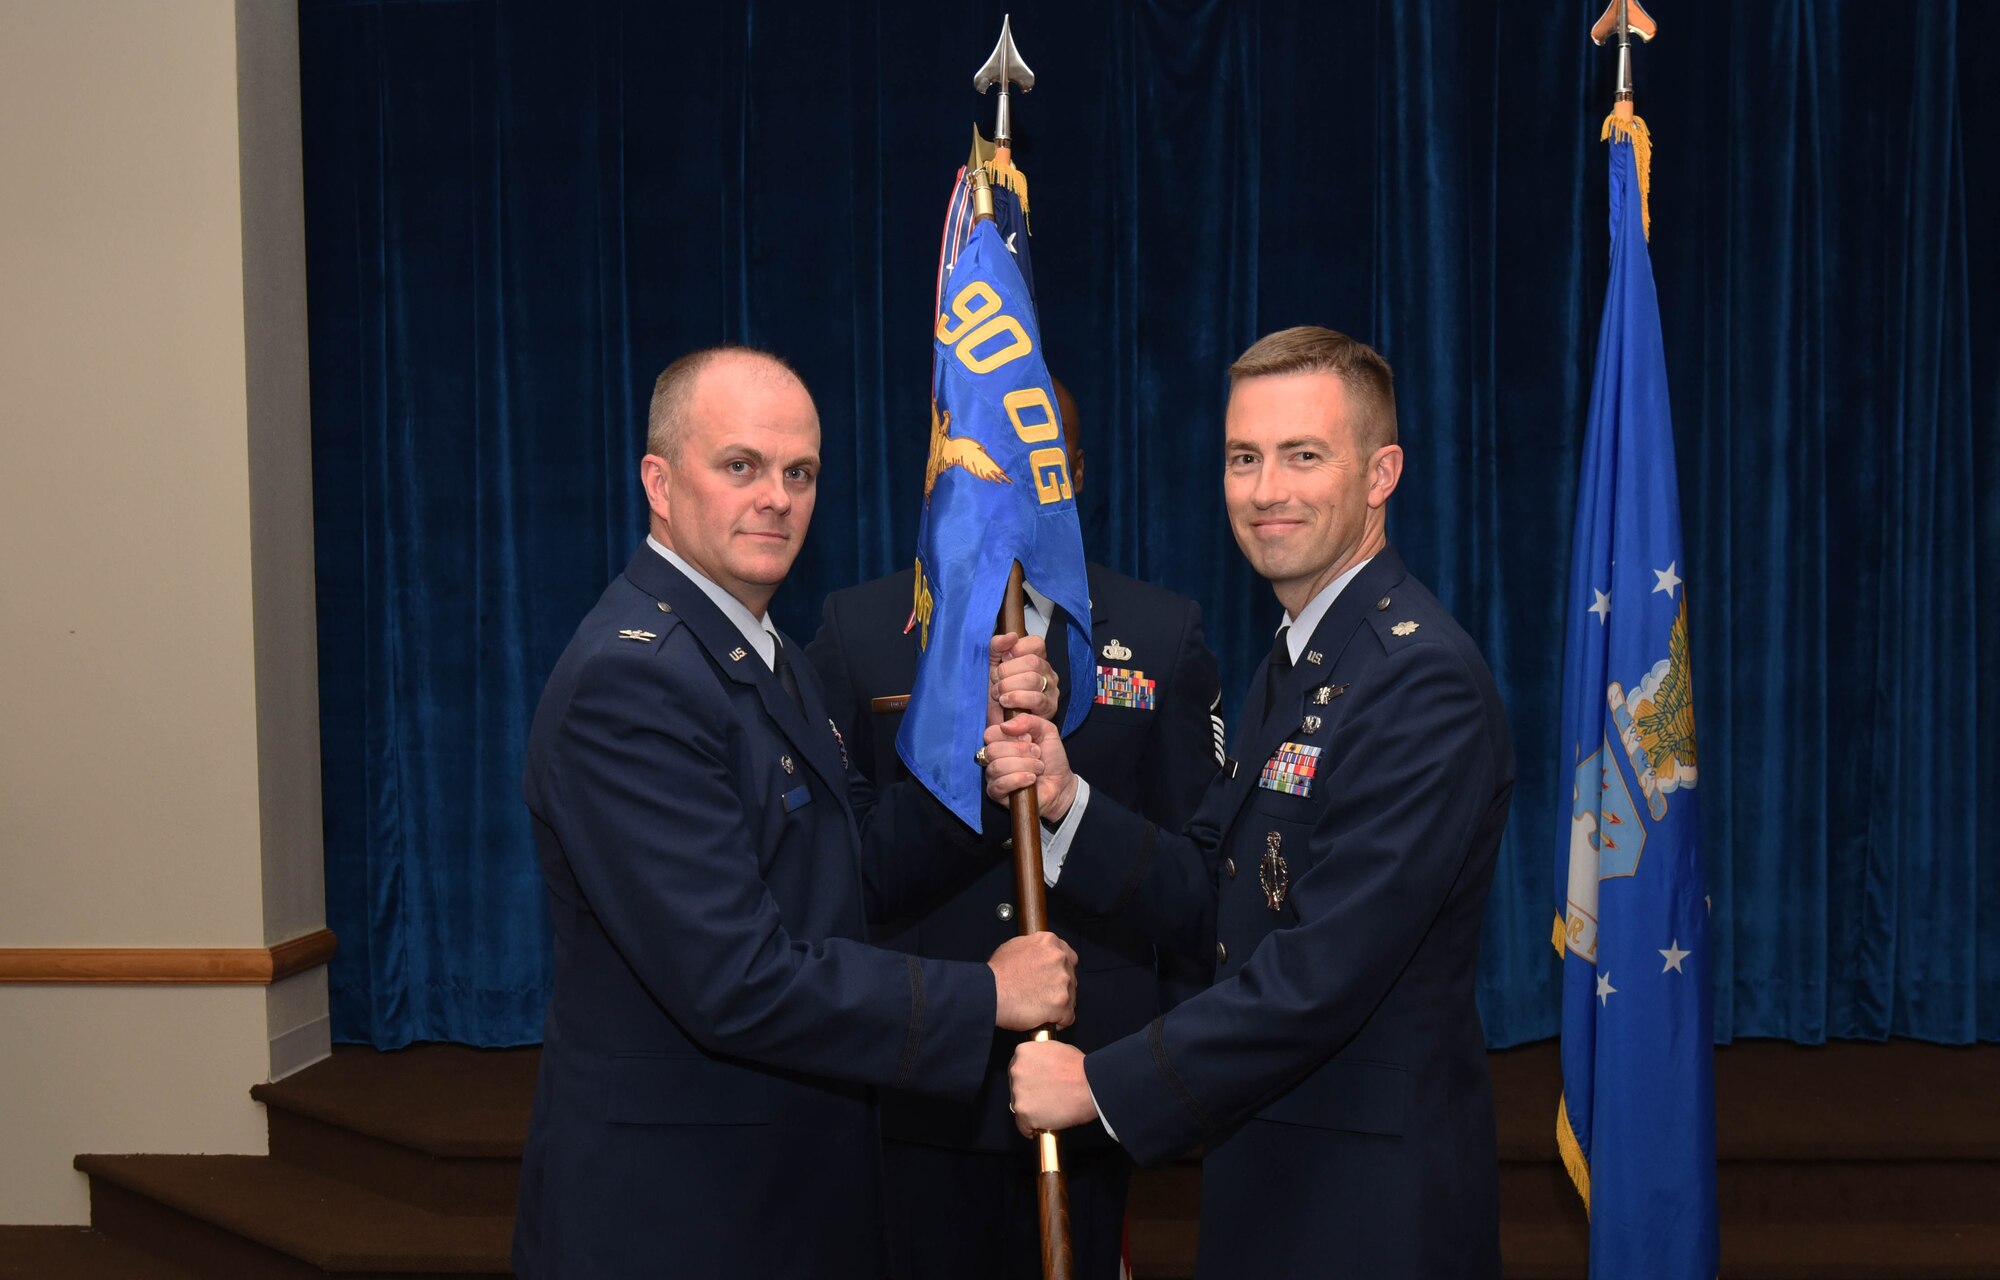 Col. Todd Sauls, 90th Operations Group commander, passes the guidon to Lt. Col. George Chapman, 320th Missile Squadron commander, during the 320th MS change of command ceremony at F.E. Warren Air Force Base, Wyo., July 5, 2017. The ceremony signified the transition of command from Lt. Col. Russell Williford. (U.S. Air Force photo by Airman 1st Class Breanna Carter)